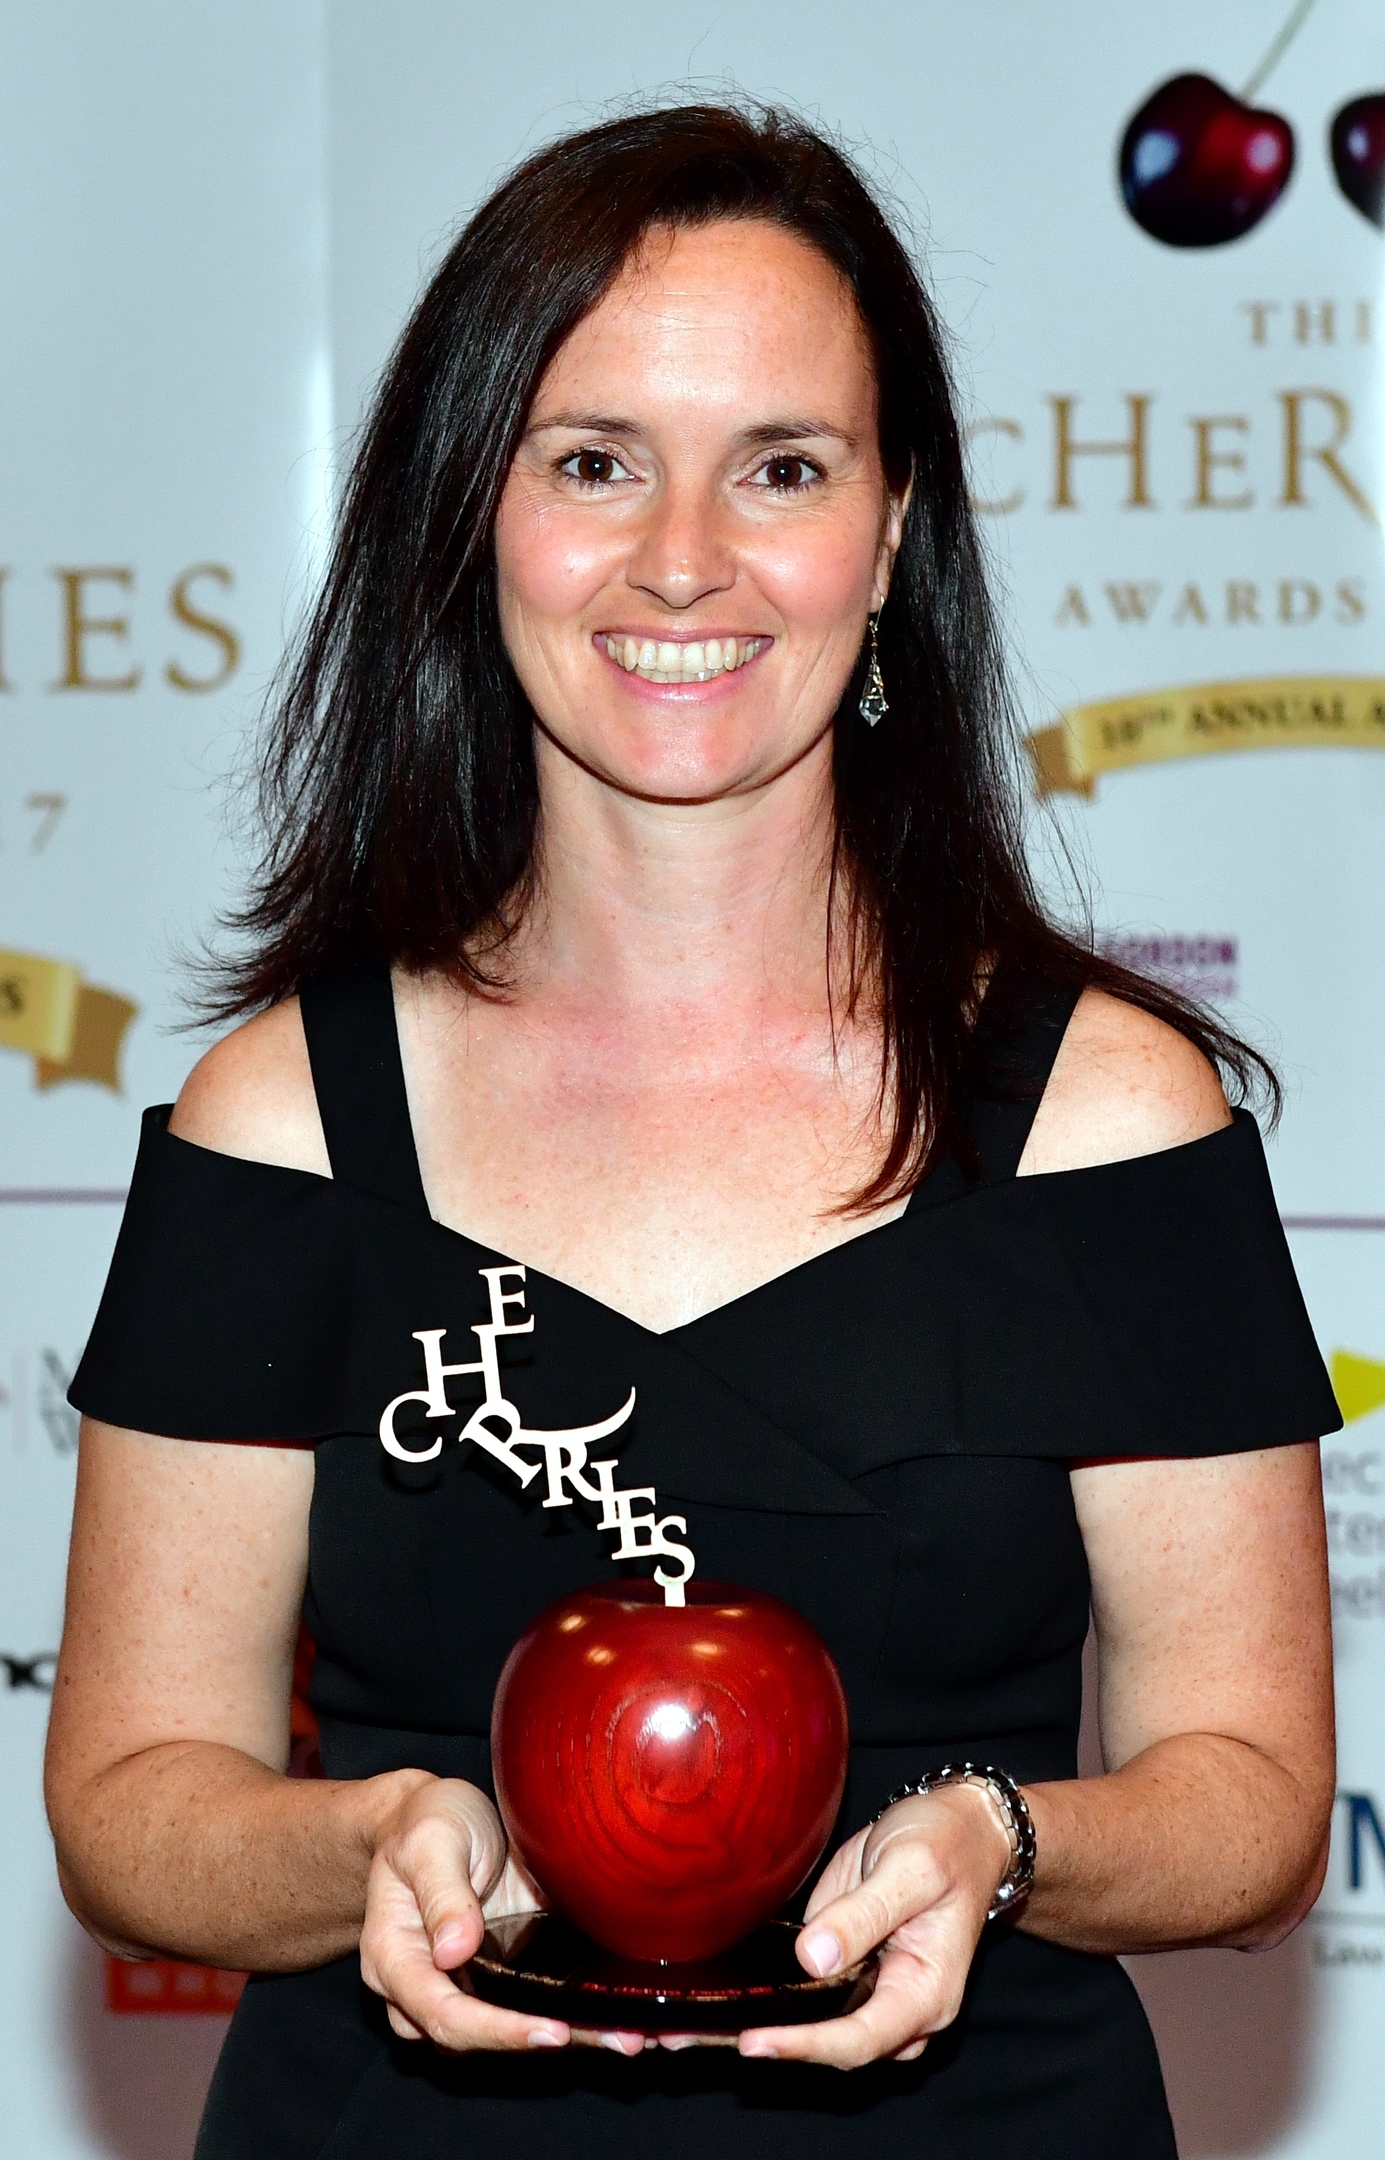 The award was collected by Christine Calder. 